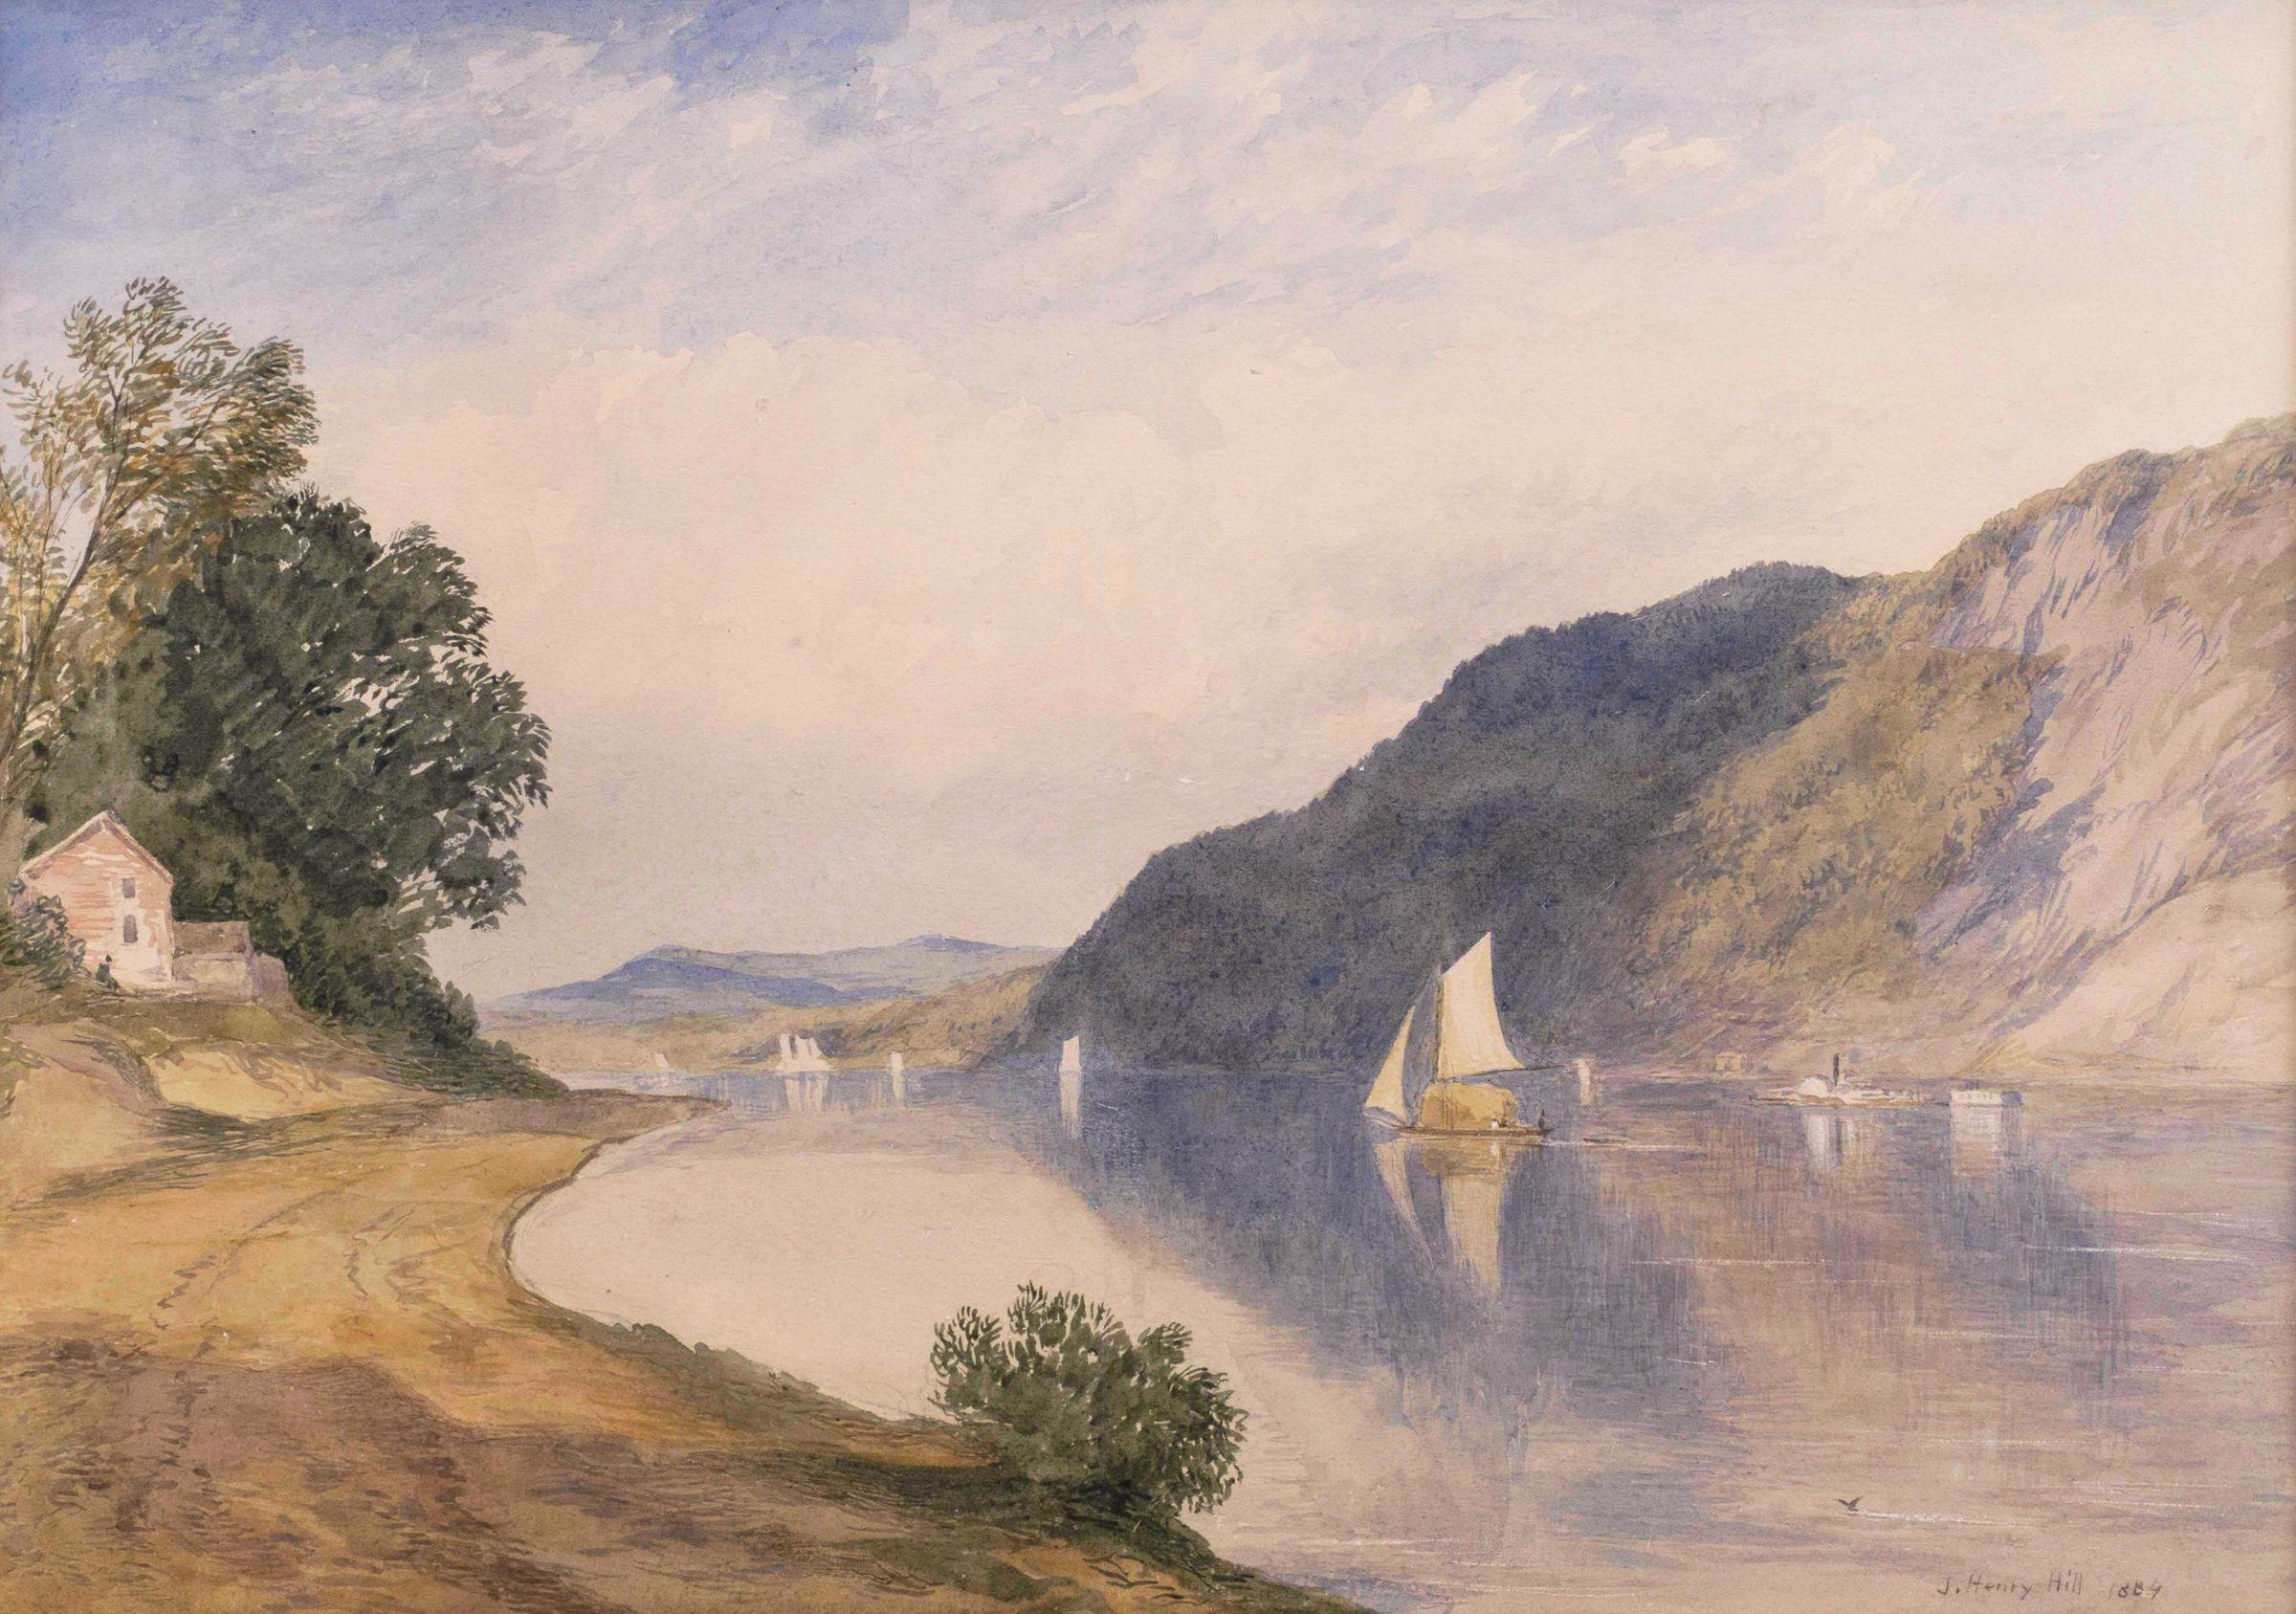 John Henry Hill (1839-1922) 
In the Hudson Highlands, 1884 
Watercolor on paper
10 1/4 x 14 3/4 inches
Signed lower right

John Henry Hill, a distinguished landscape painter, hailed from a family of artists. His father, John William Hill, was a